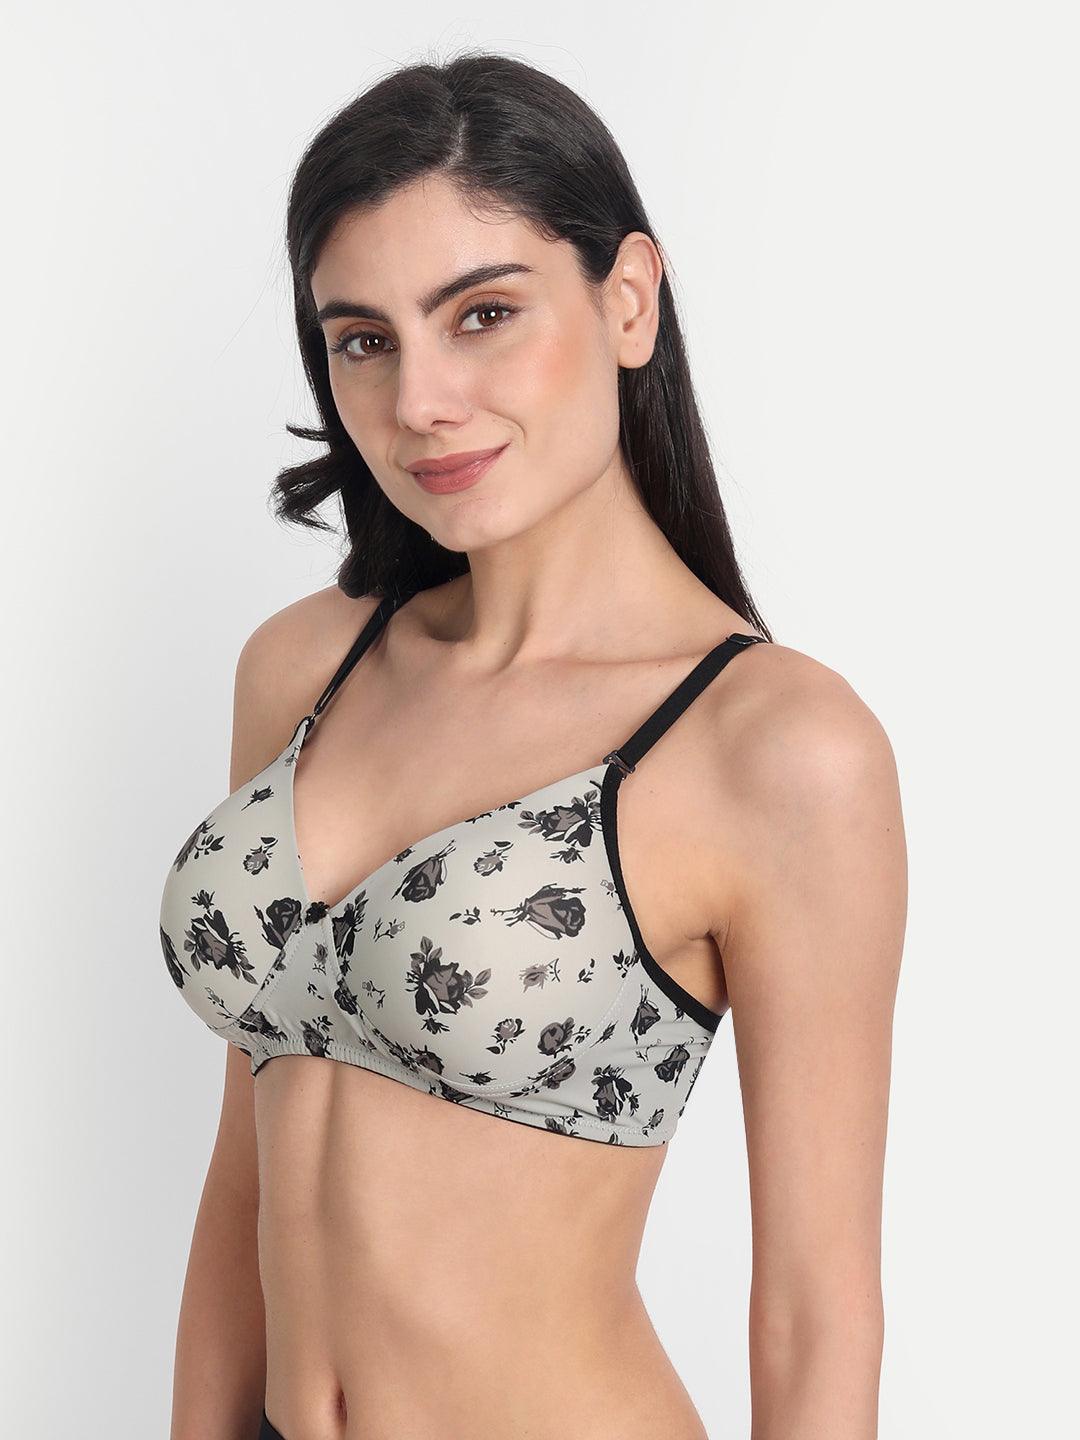 Green military light Moulded cotton push-up bra - Buy Online